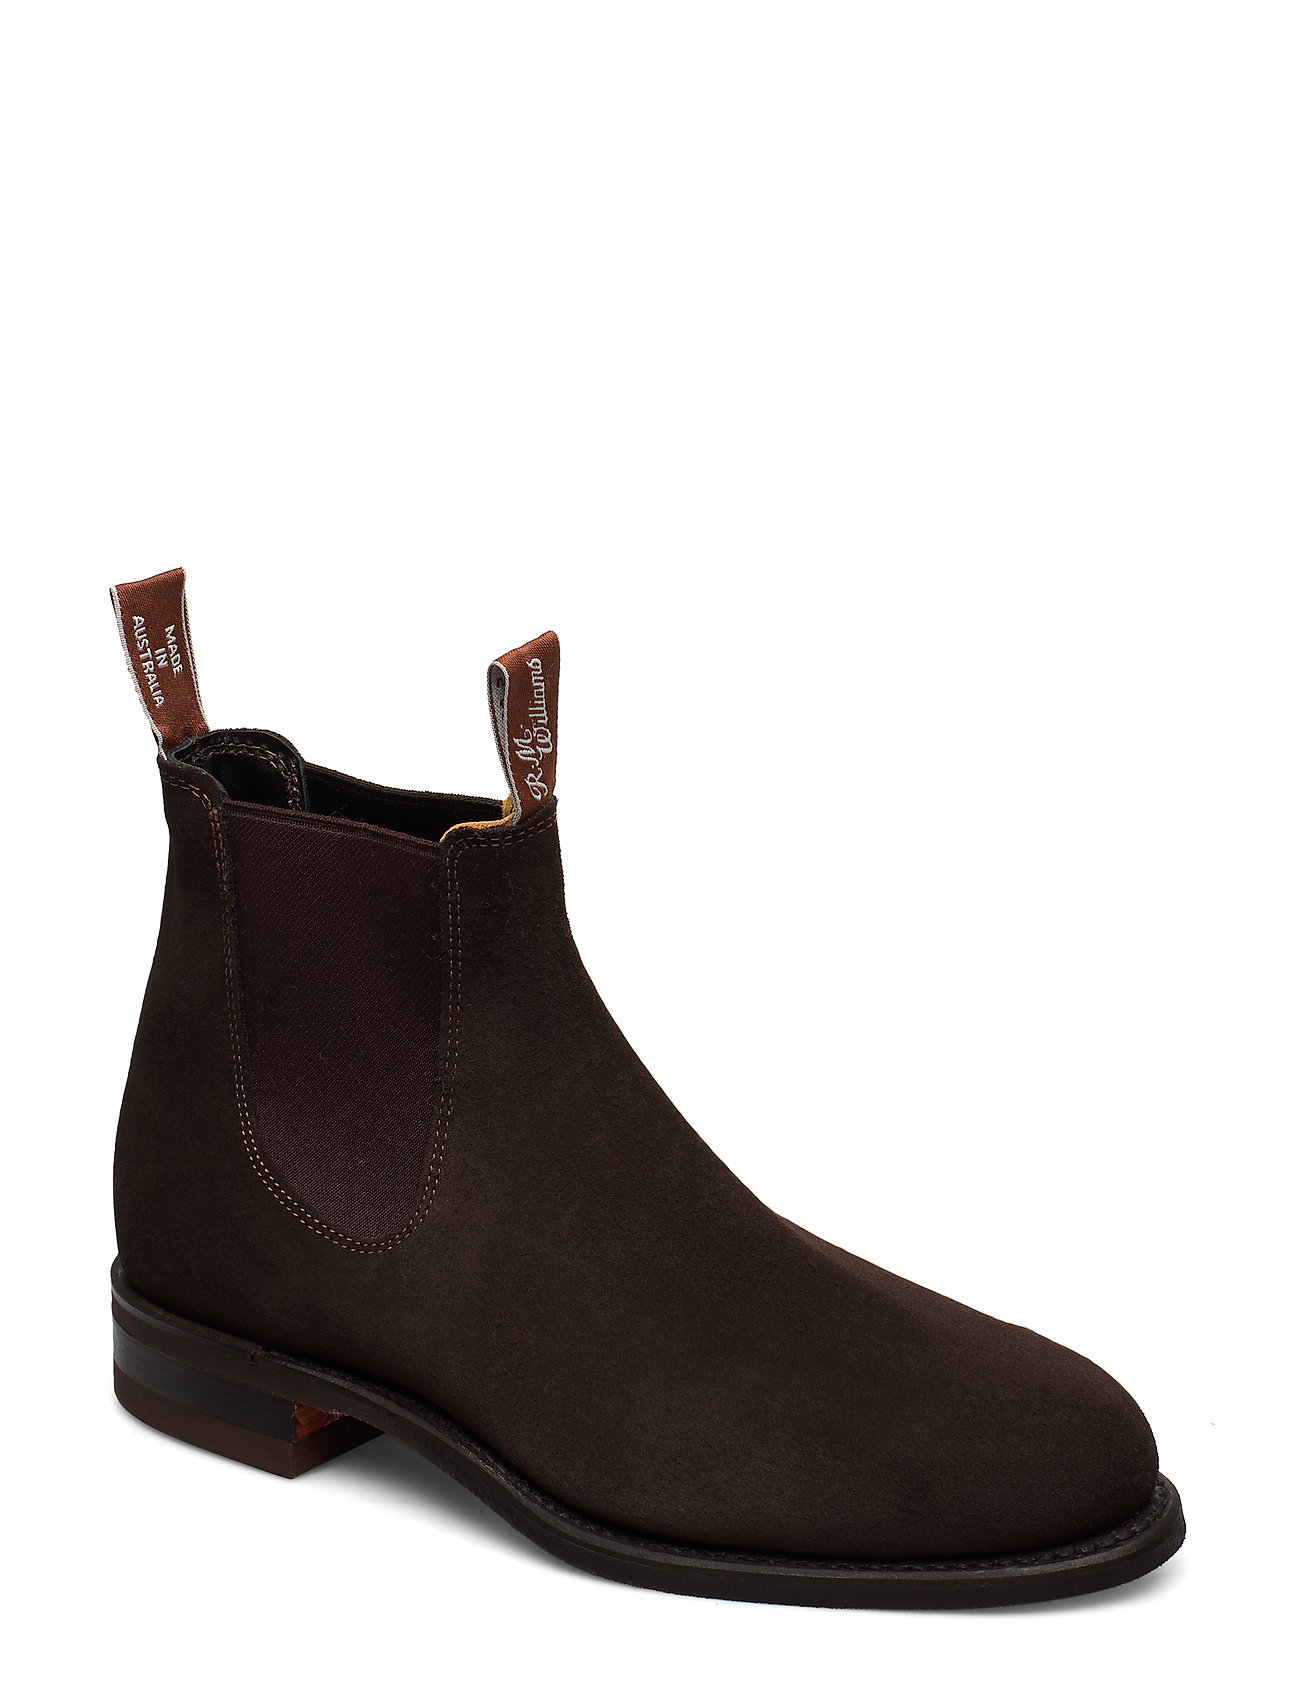 R.M. Williams - Wentworth G-last Suede Chocolate - boots - chocolate - 0